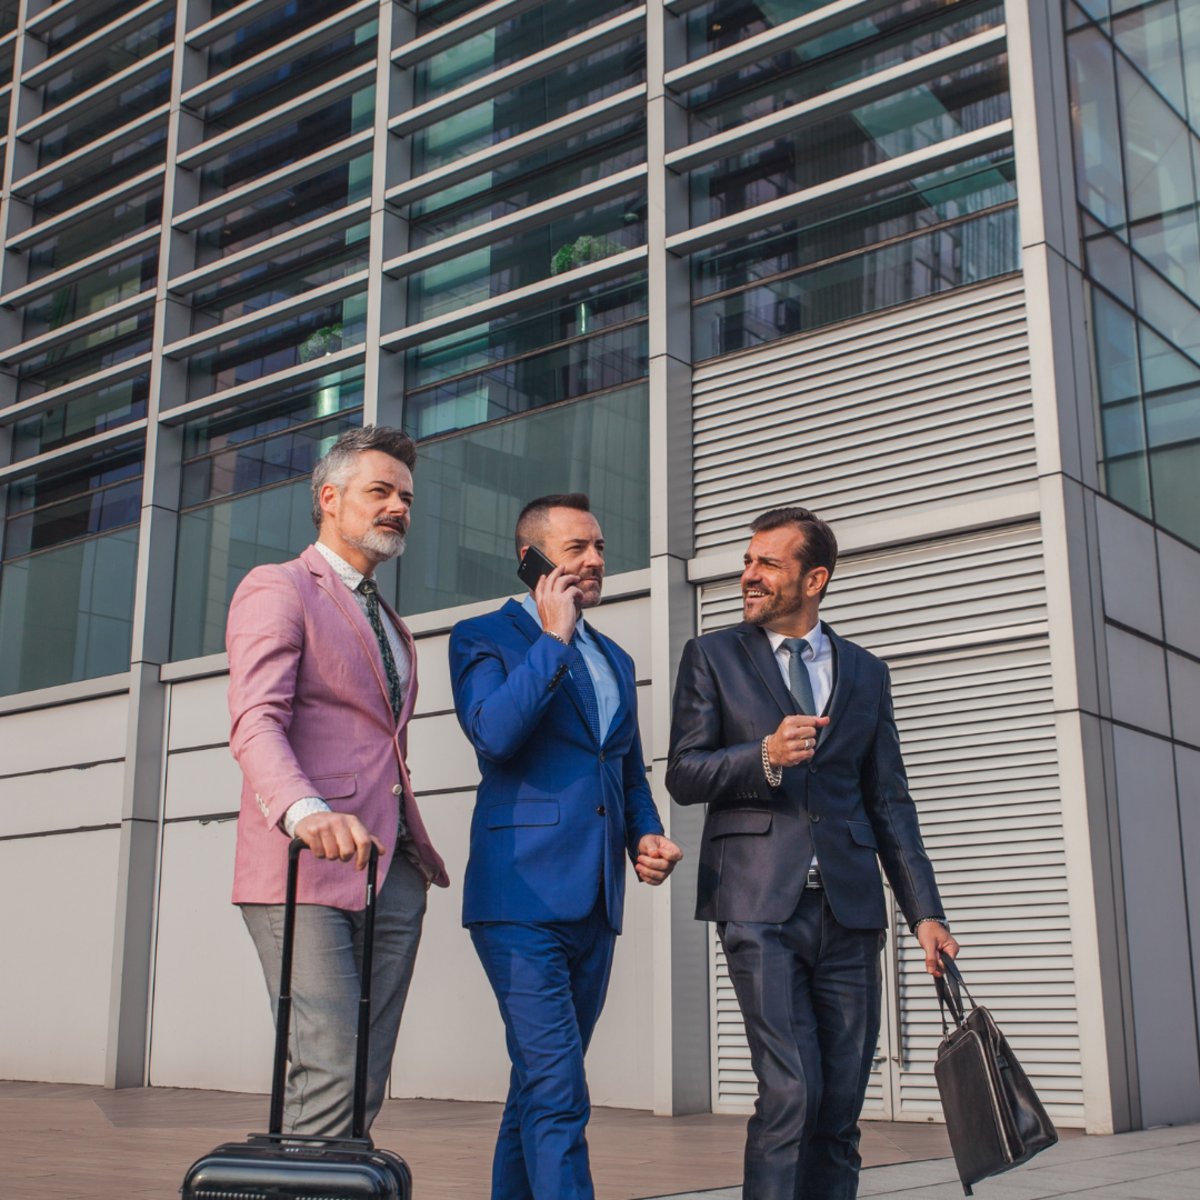 Welcome, business trailblazers! Touch down in Kansas City and let the adventure begin. Unwind in style, conquer your meetings, and let us take care of the rest. Your success story starts with Holiday Inn Kansas City Downtown! #businesstravel #corporatetravel